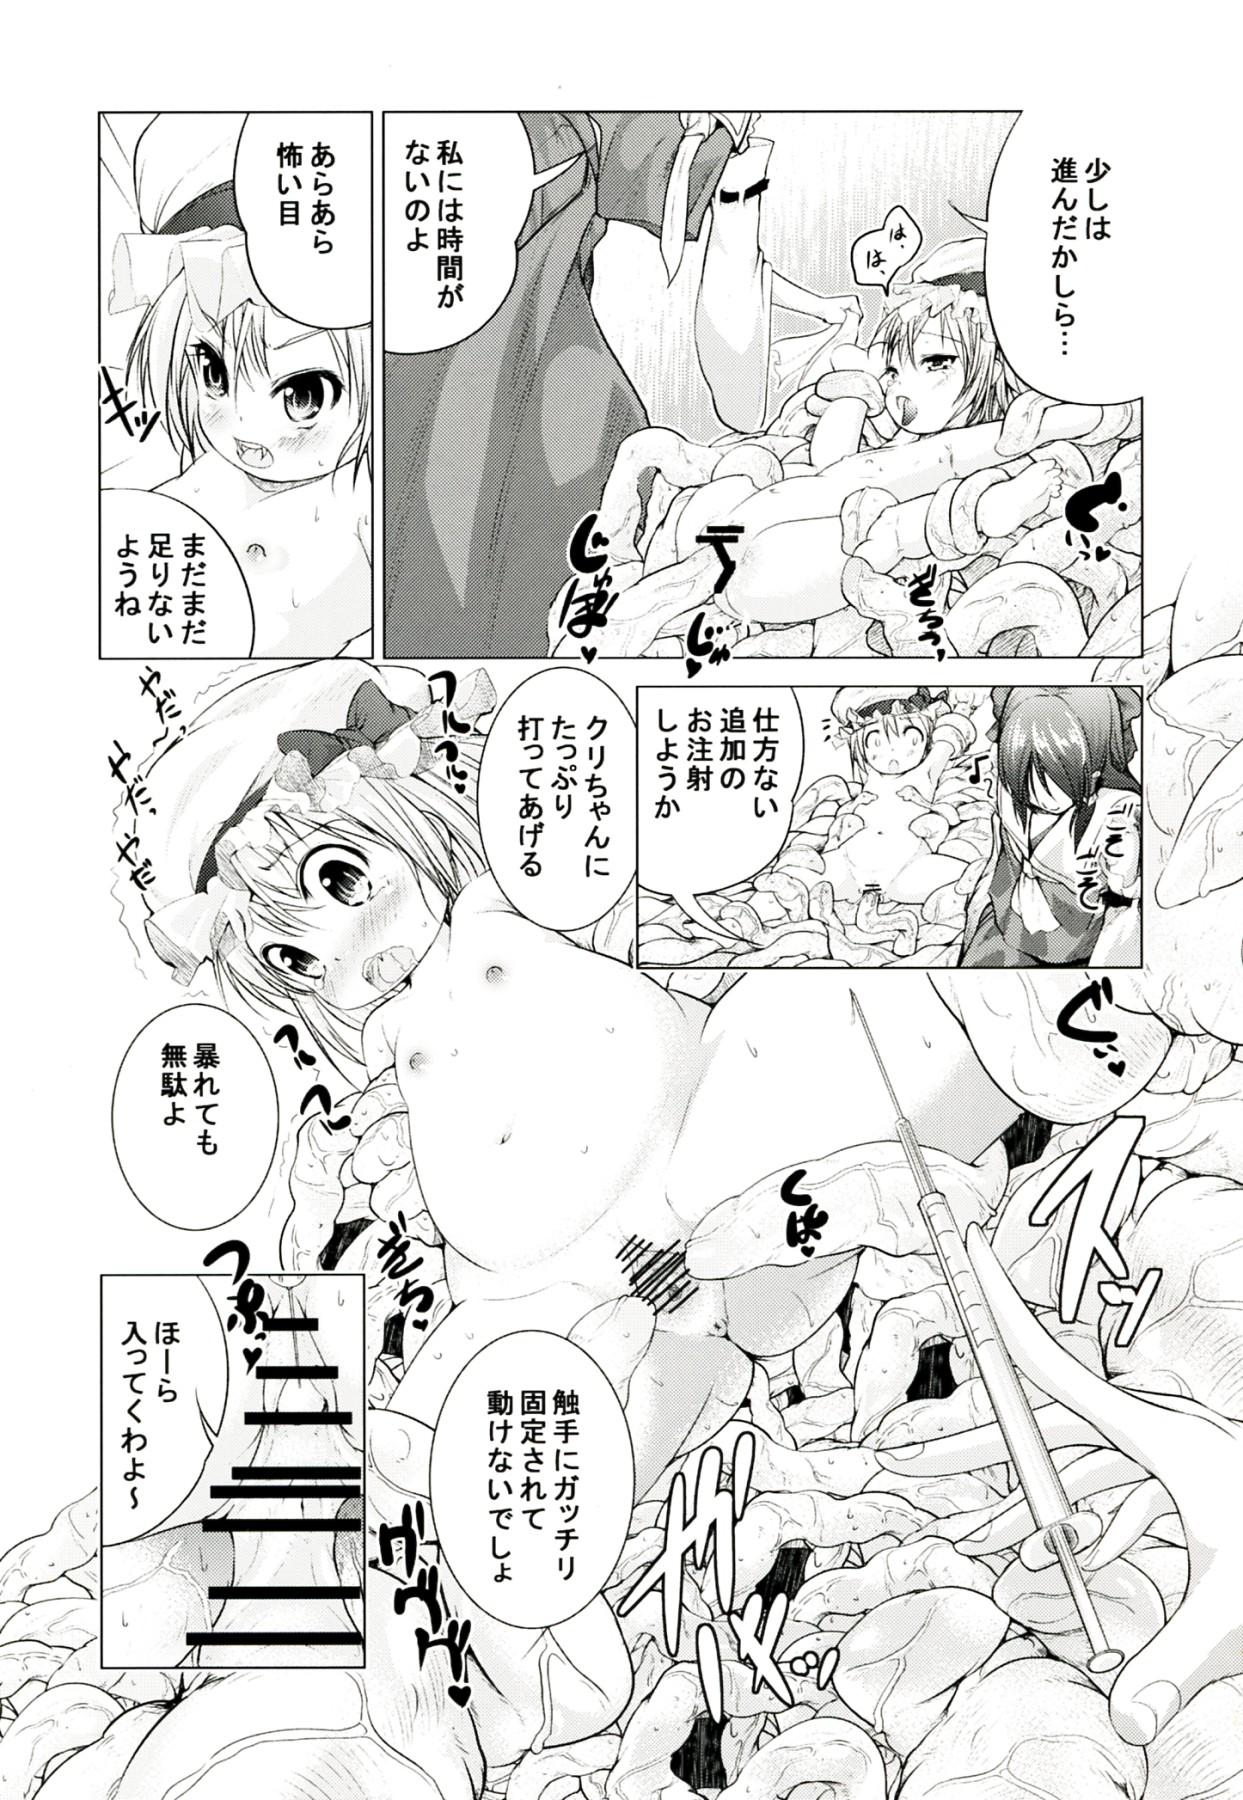 Slapping Touhou no hon 2 - Touhou project All - Page 11